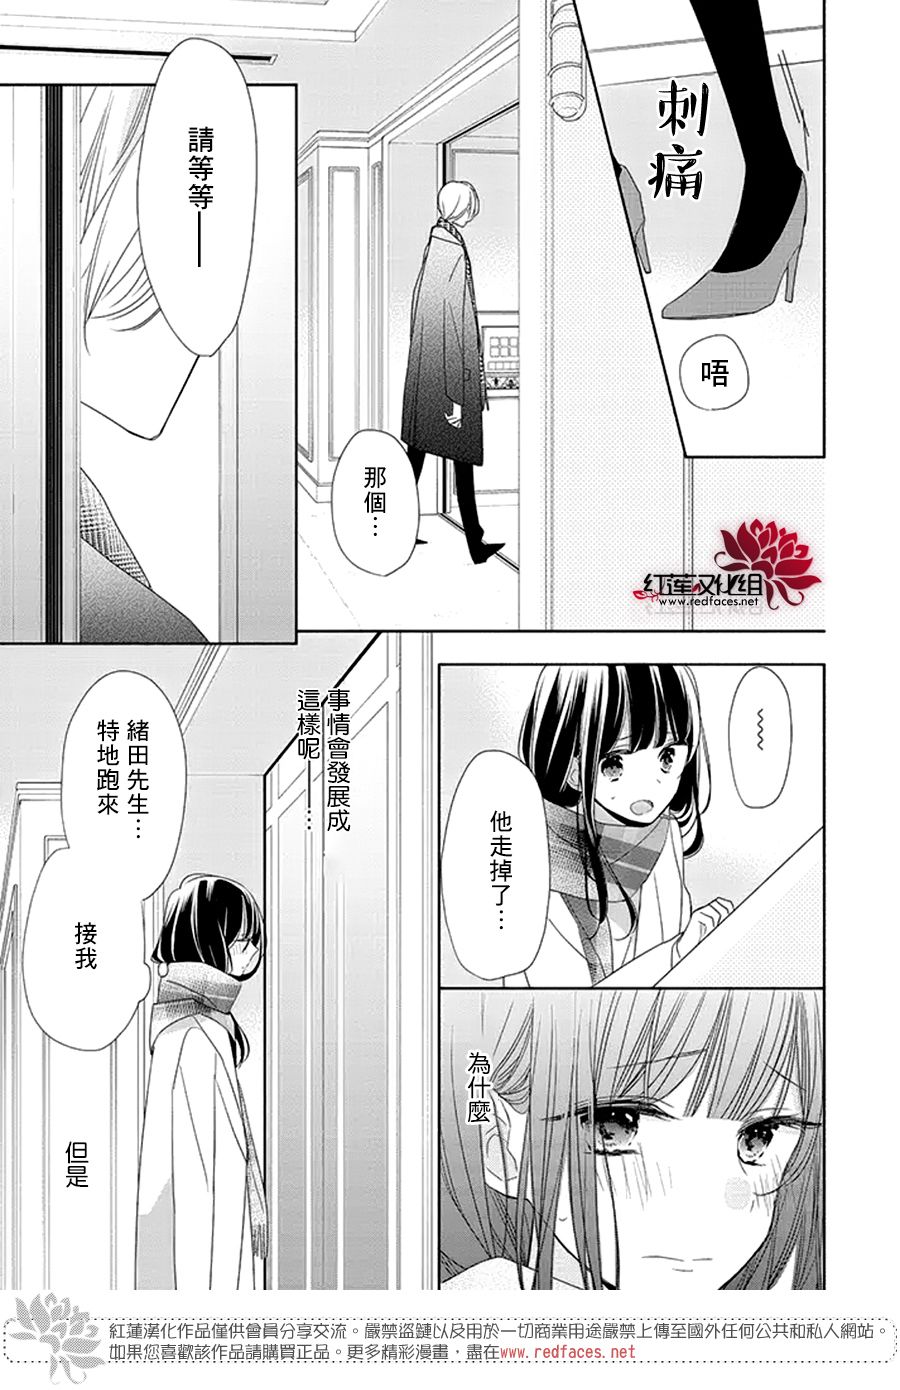 If given a second chance - 21話 - 5